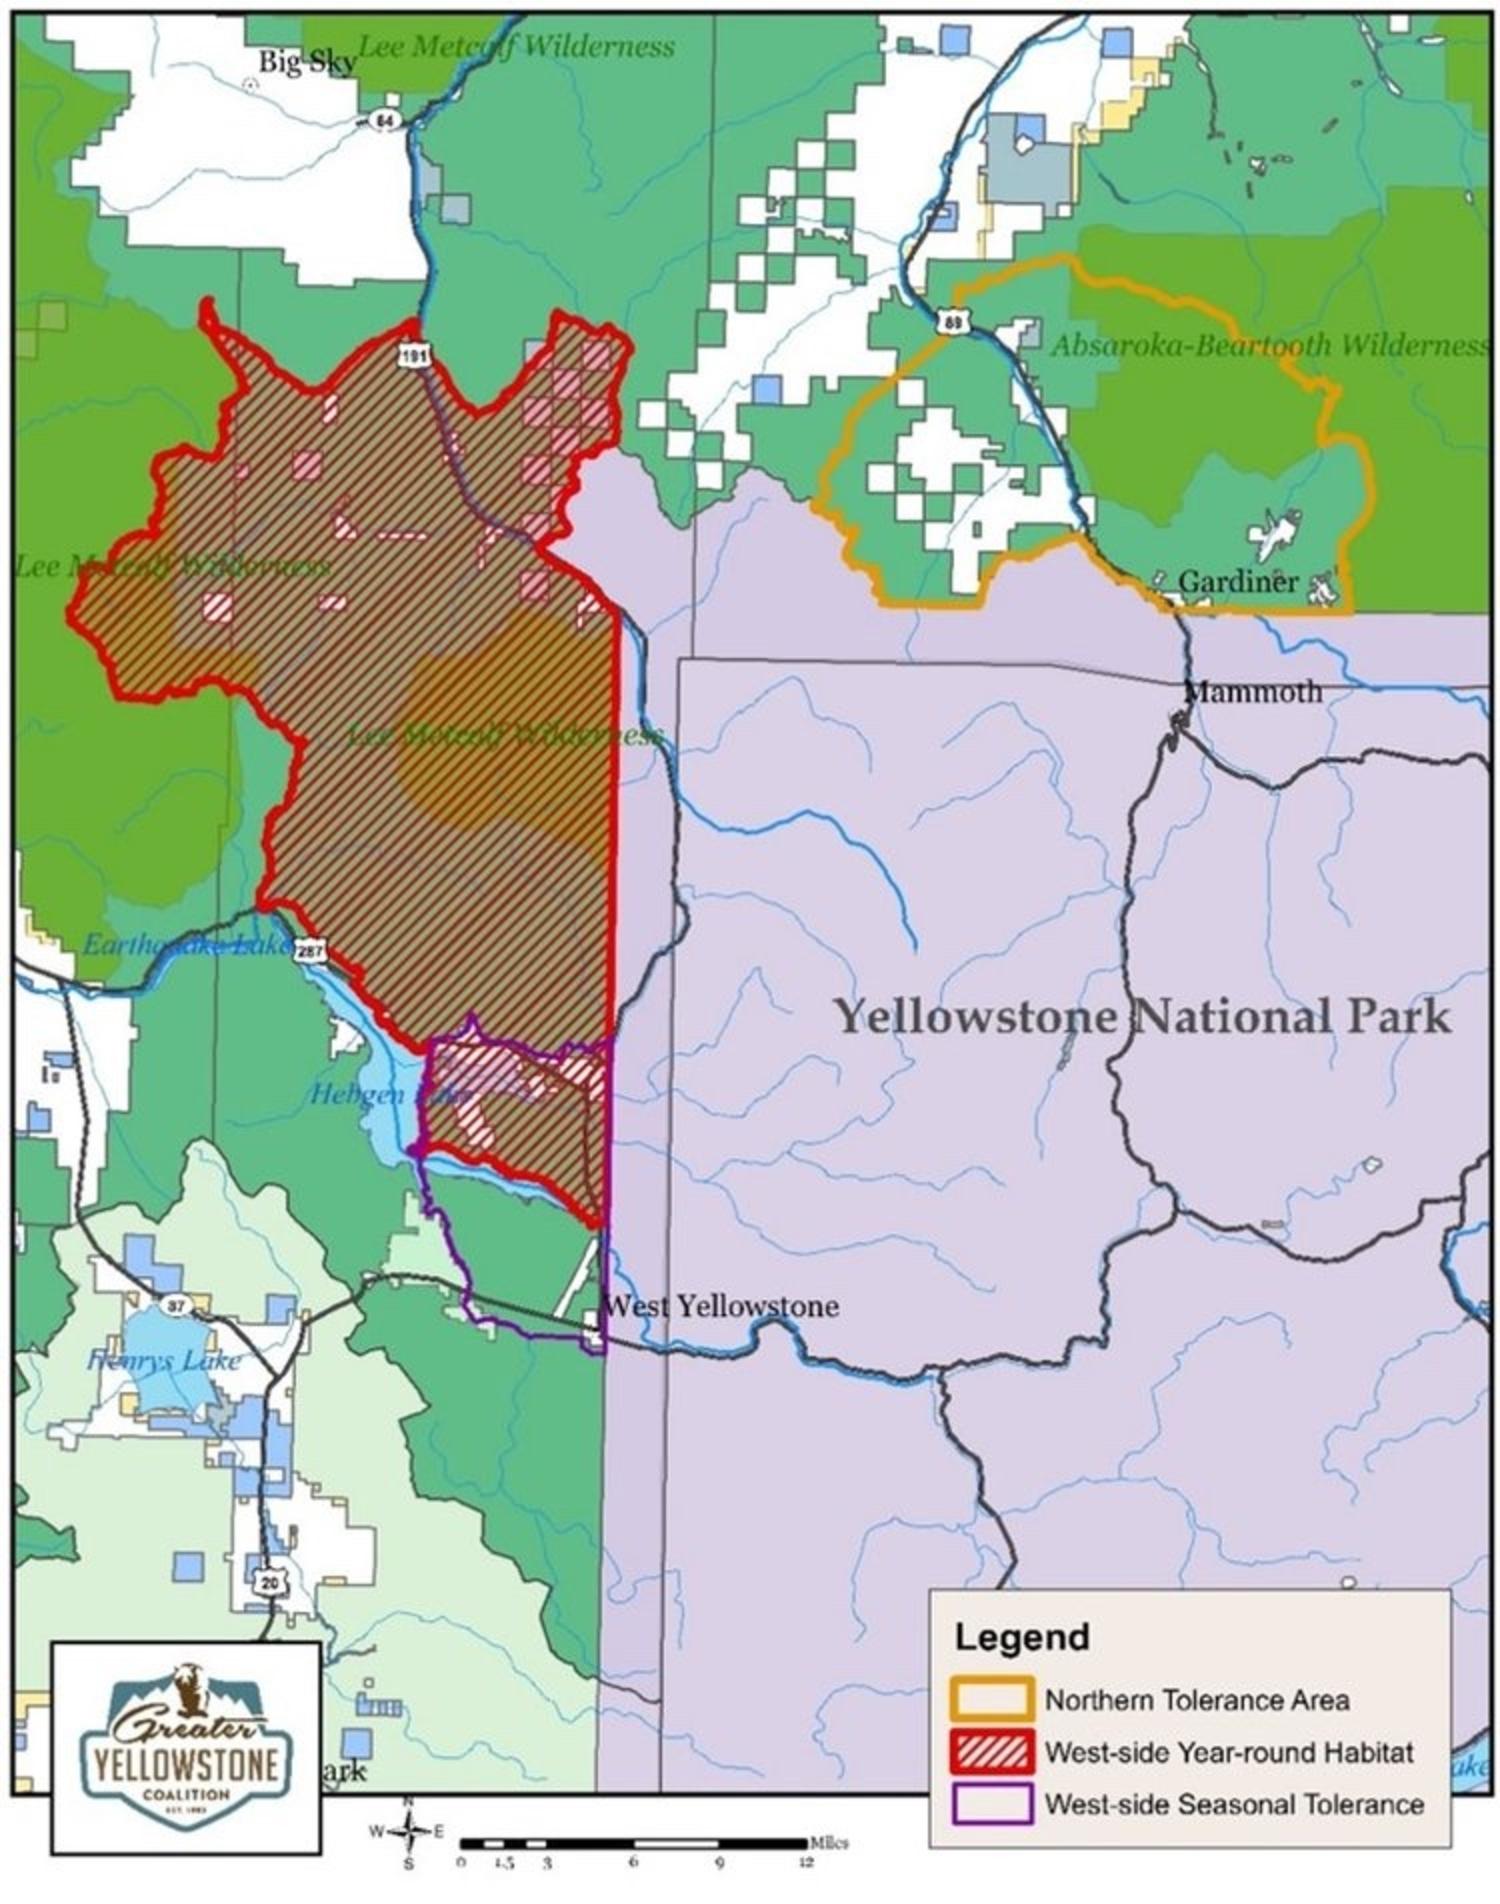 Map showing lands where state of Montana agreed to allow Yellowstone bison more room to roam outside the national park.  Unfortunately, says Phil Knight, the full promise of the deal hasn't been realized. Map courtesy Greater Yellowstone Coalition